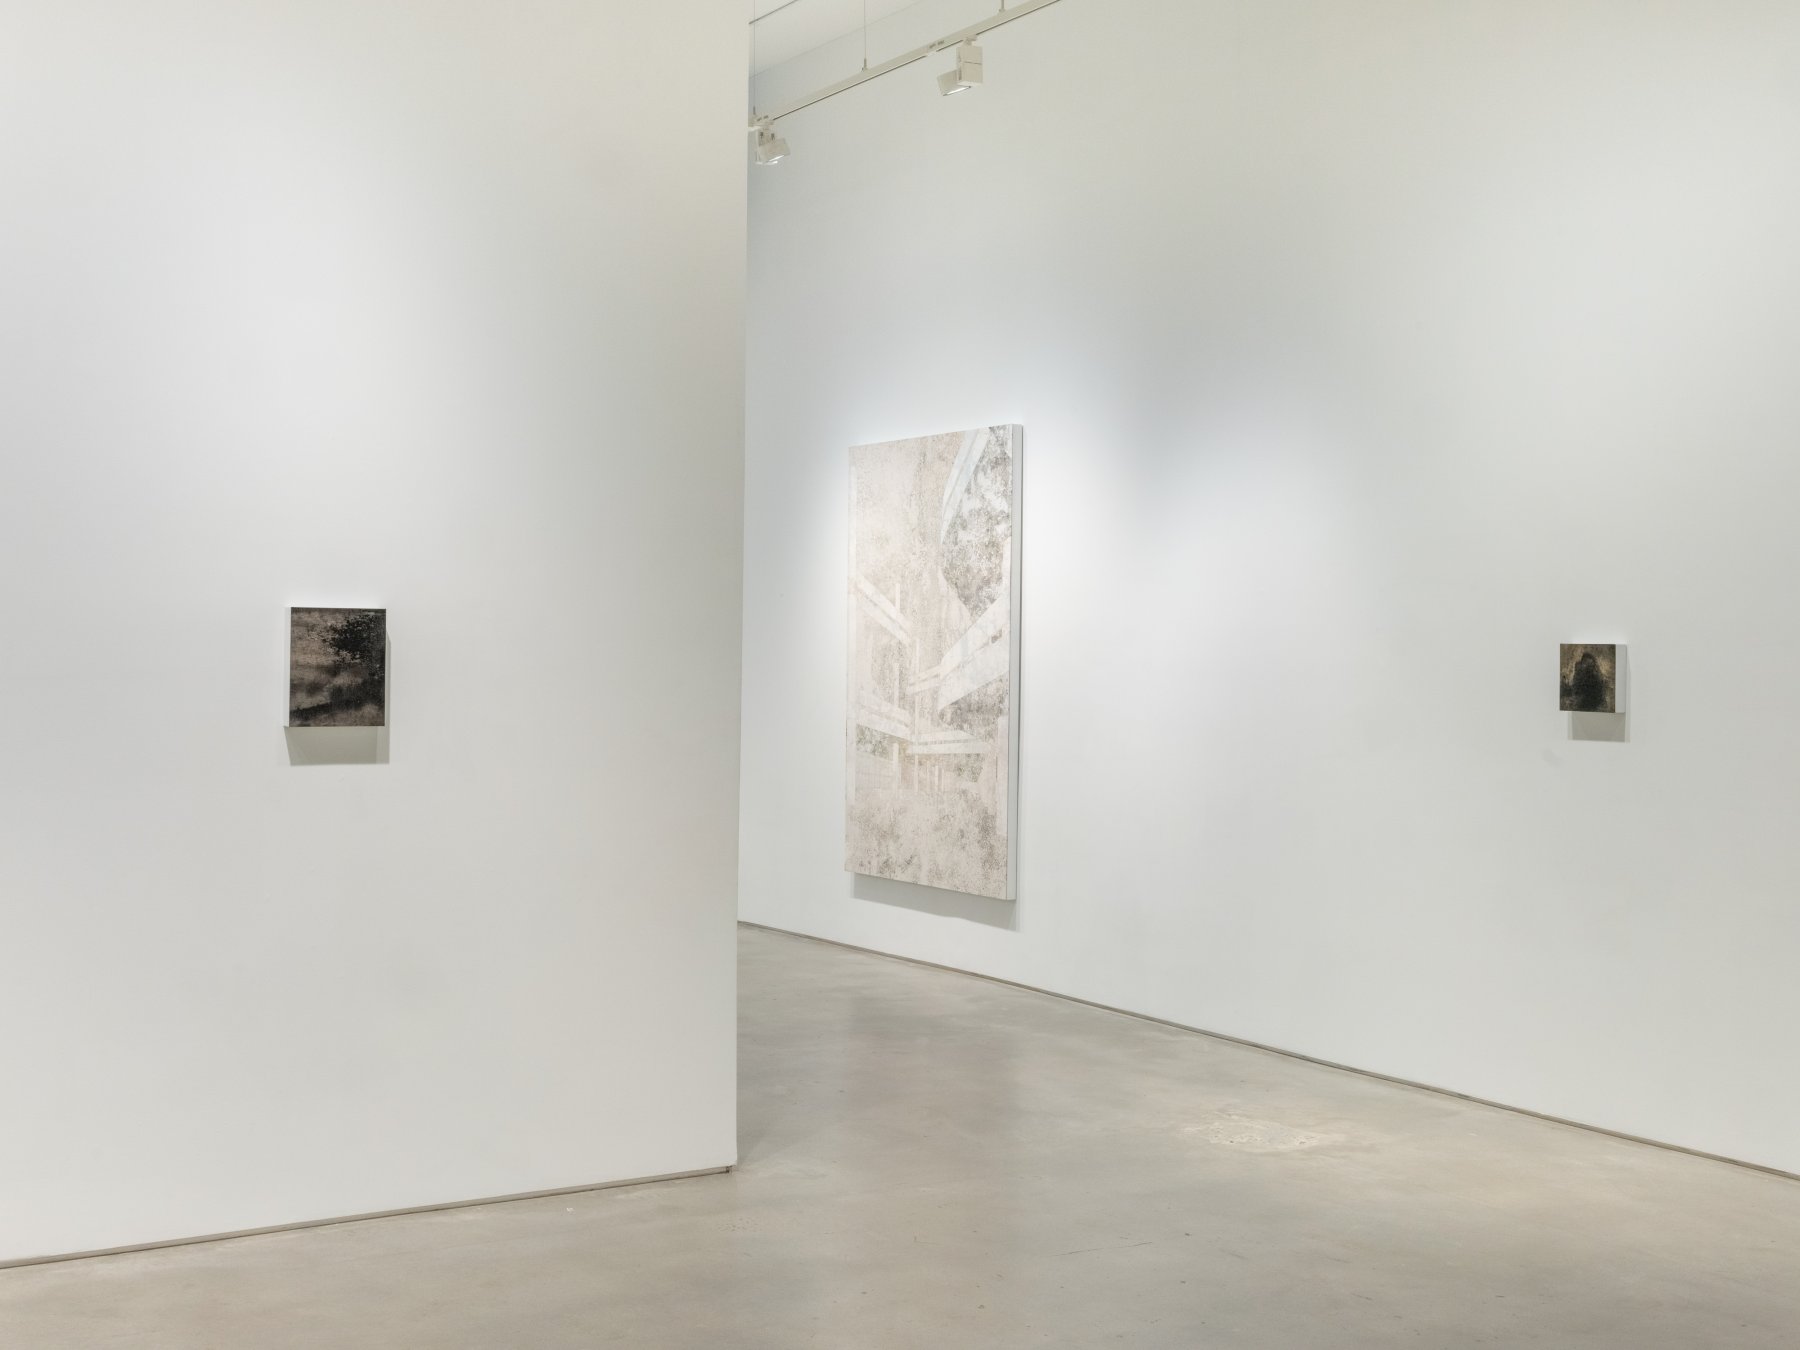 Installation image for Daniel Senise: The Site of Images, at Nara Roesler